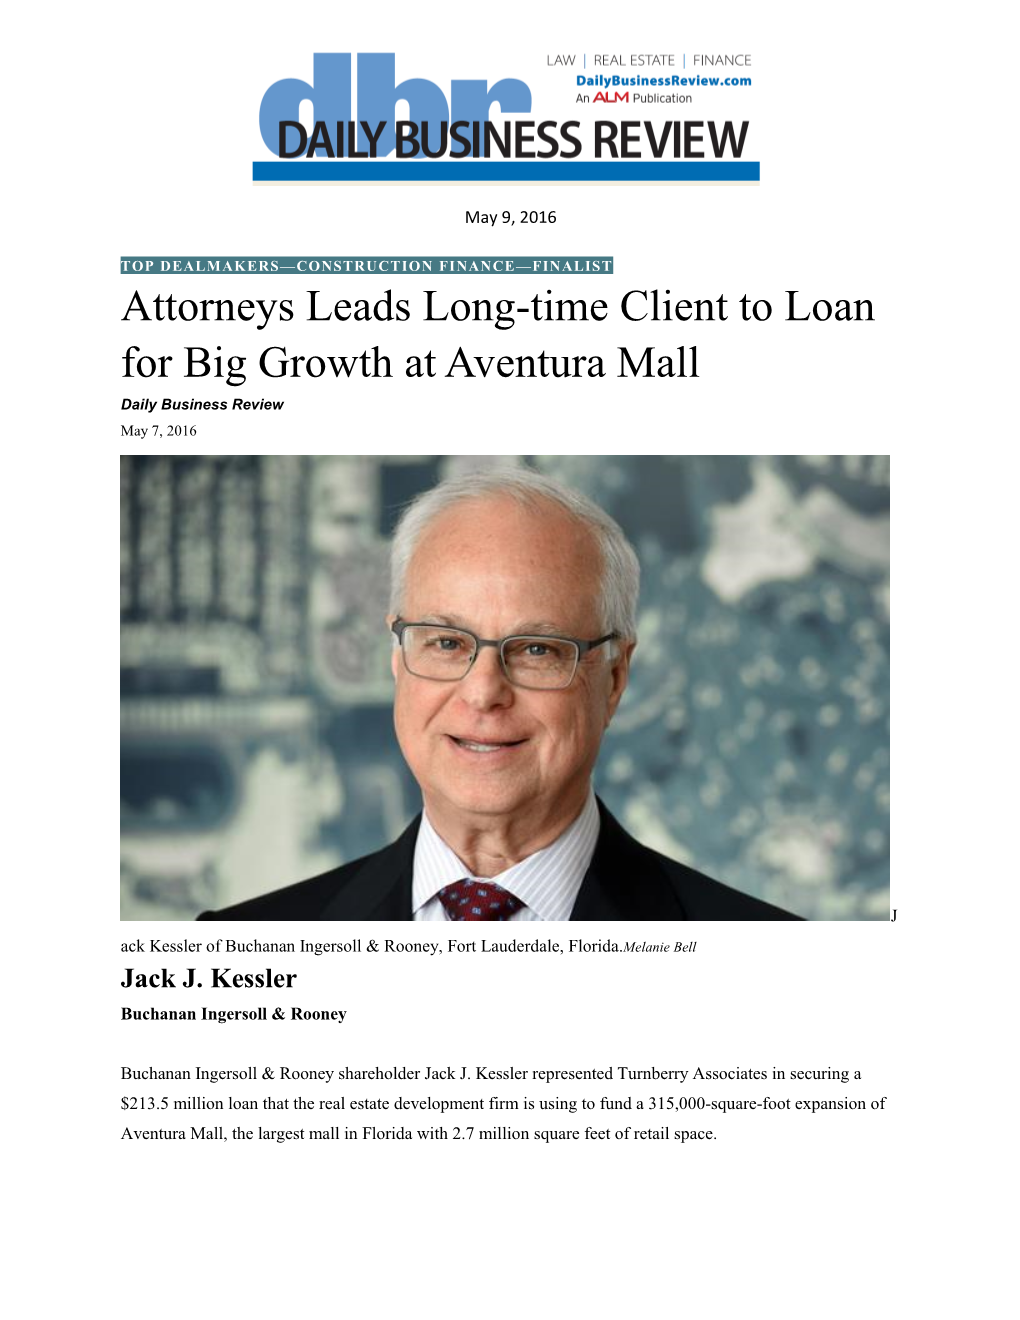 Attorneys Leads Long-Time Client to Loan for Big Growth at Aventura Mall Daily Business Review May 7, 2016